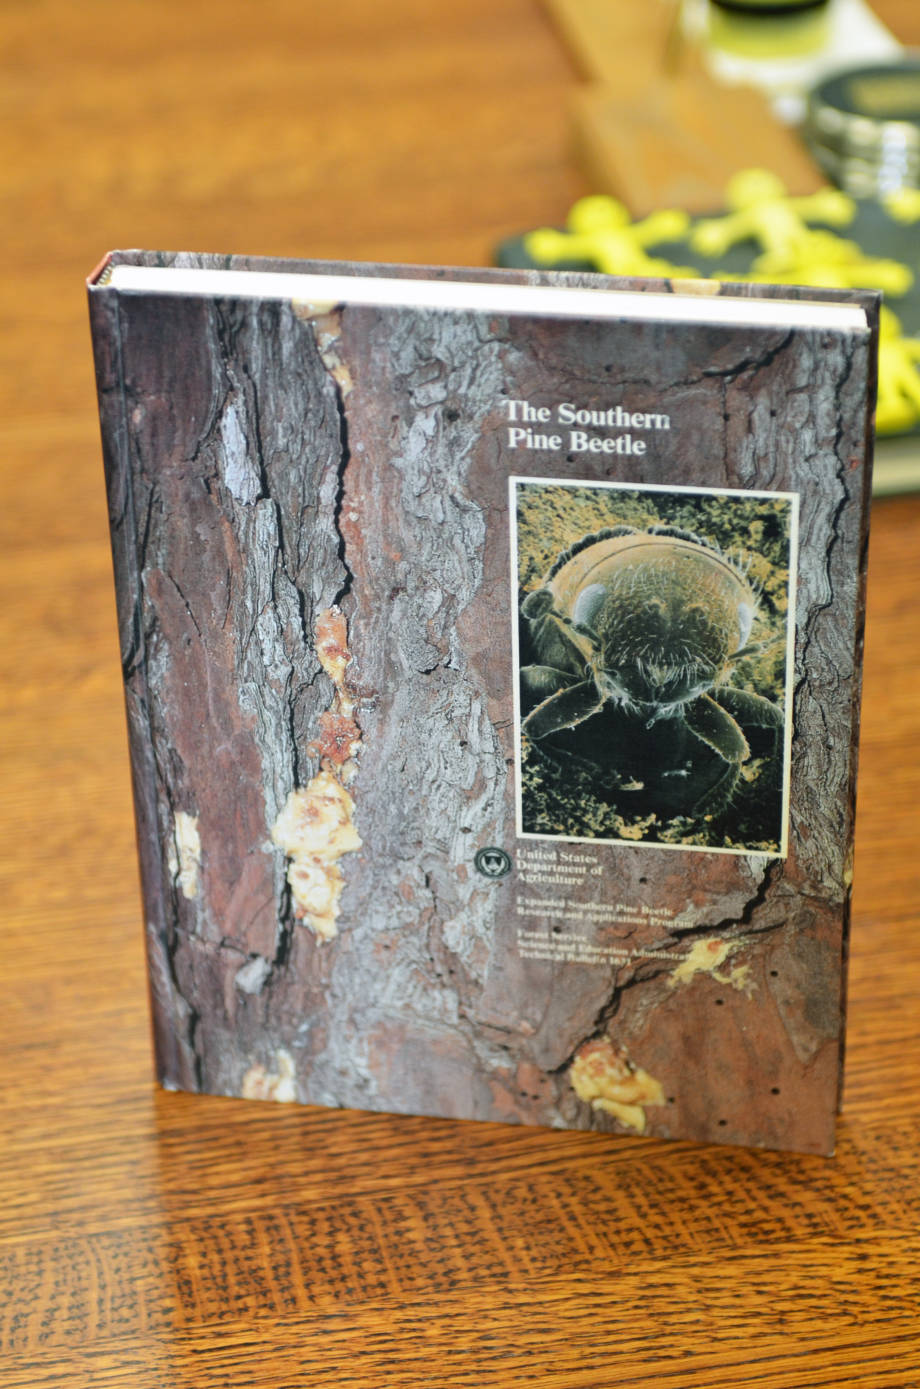 While at Texas A&M, Tom Payne serves as the research coordinator of the Southern Pine Beetle Program, sponsored by the USDA. Pictured is a book that resulted from the project's research. On the cover is a photo of a beetle that Tom took. Photo by Stephen Schmidt.